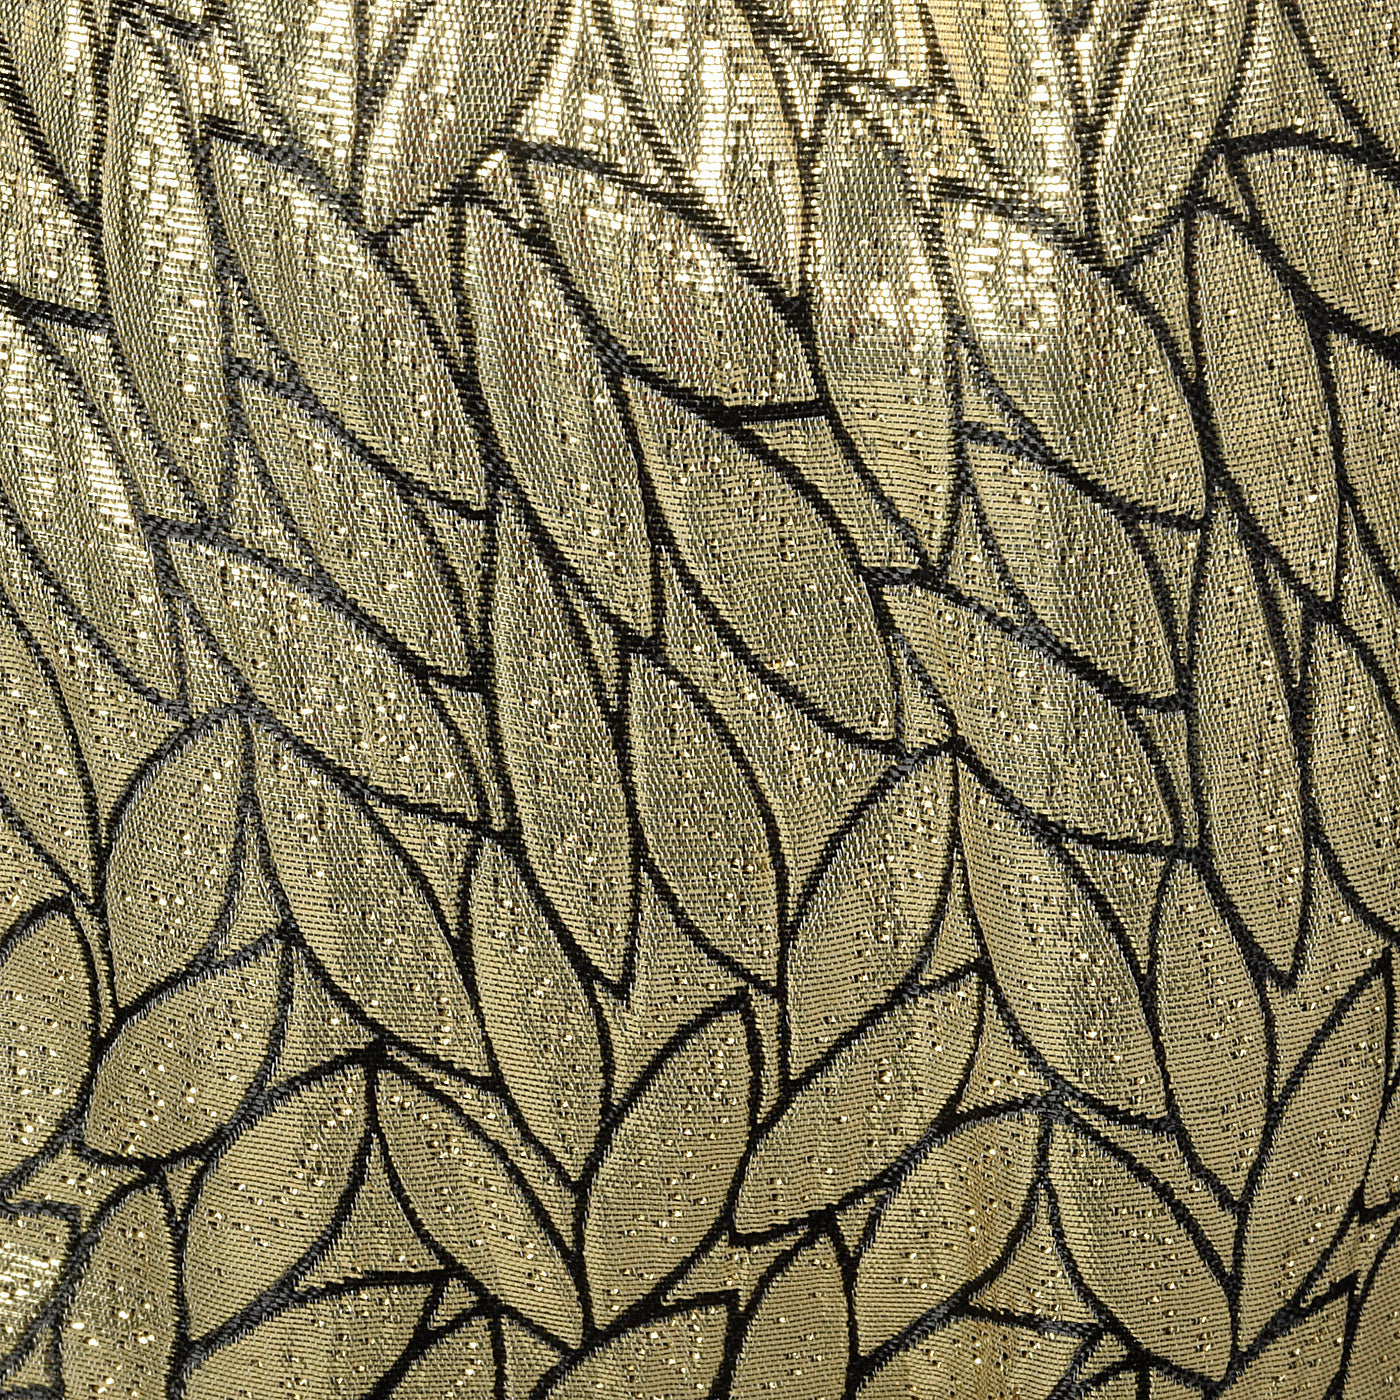 1960s Metallic Gold Dress with Leaf Style Pattern